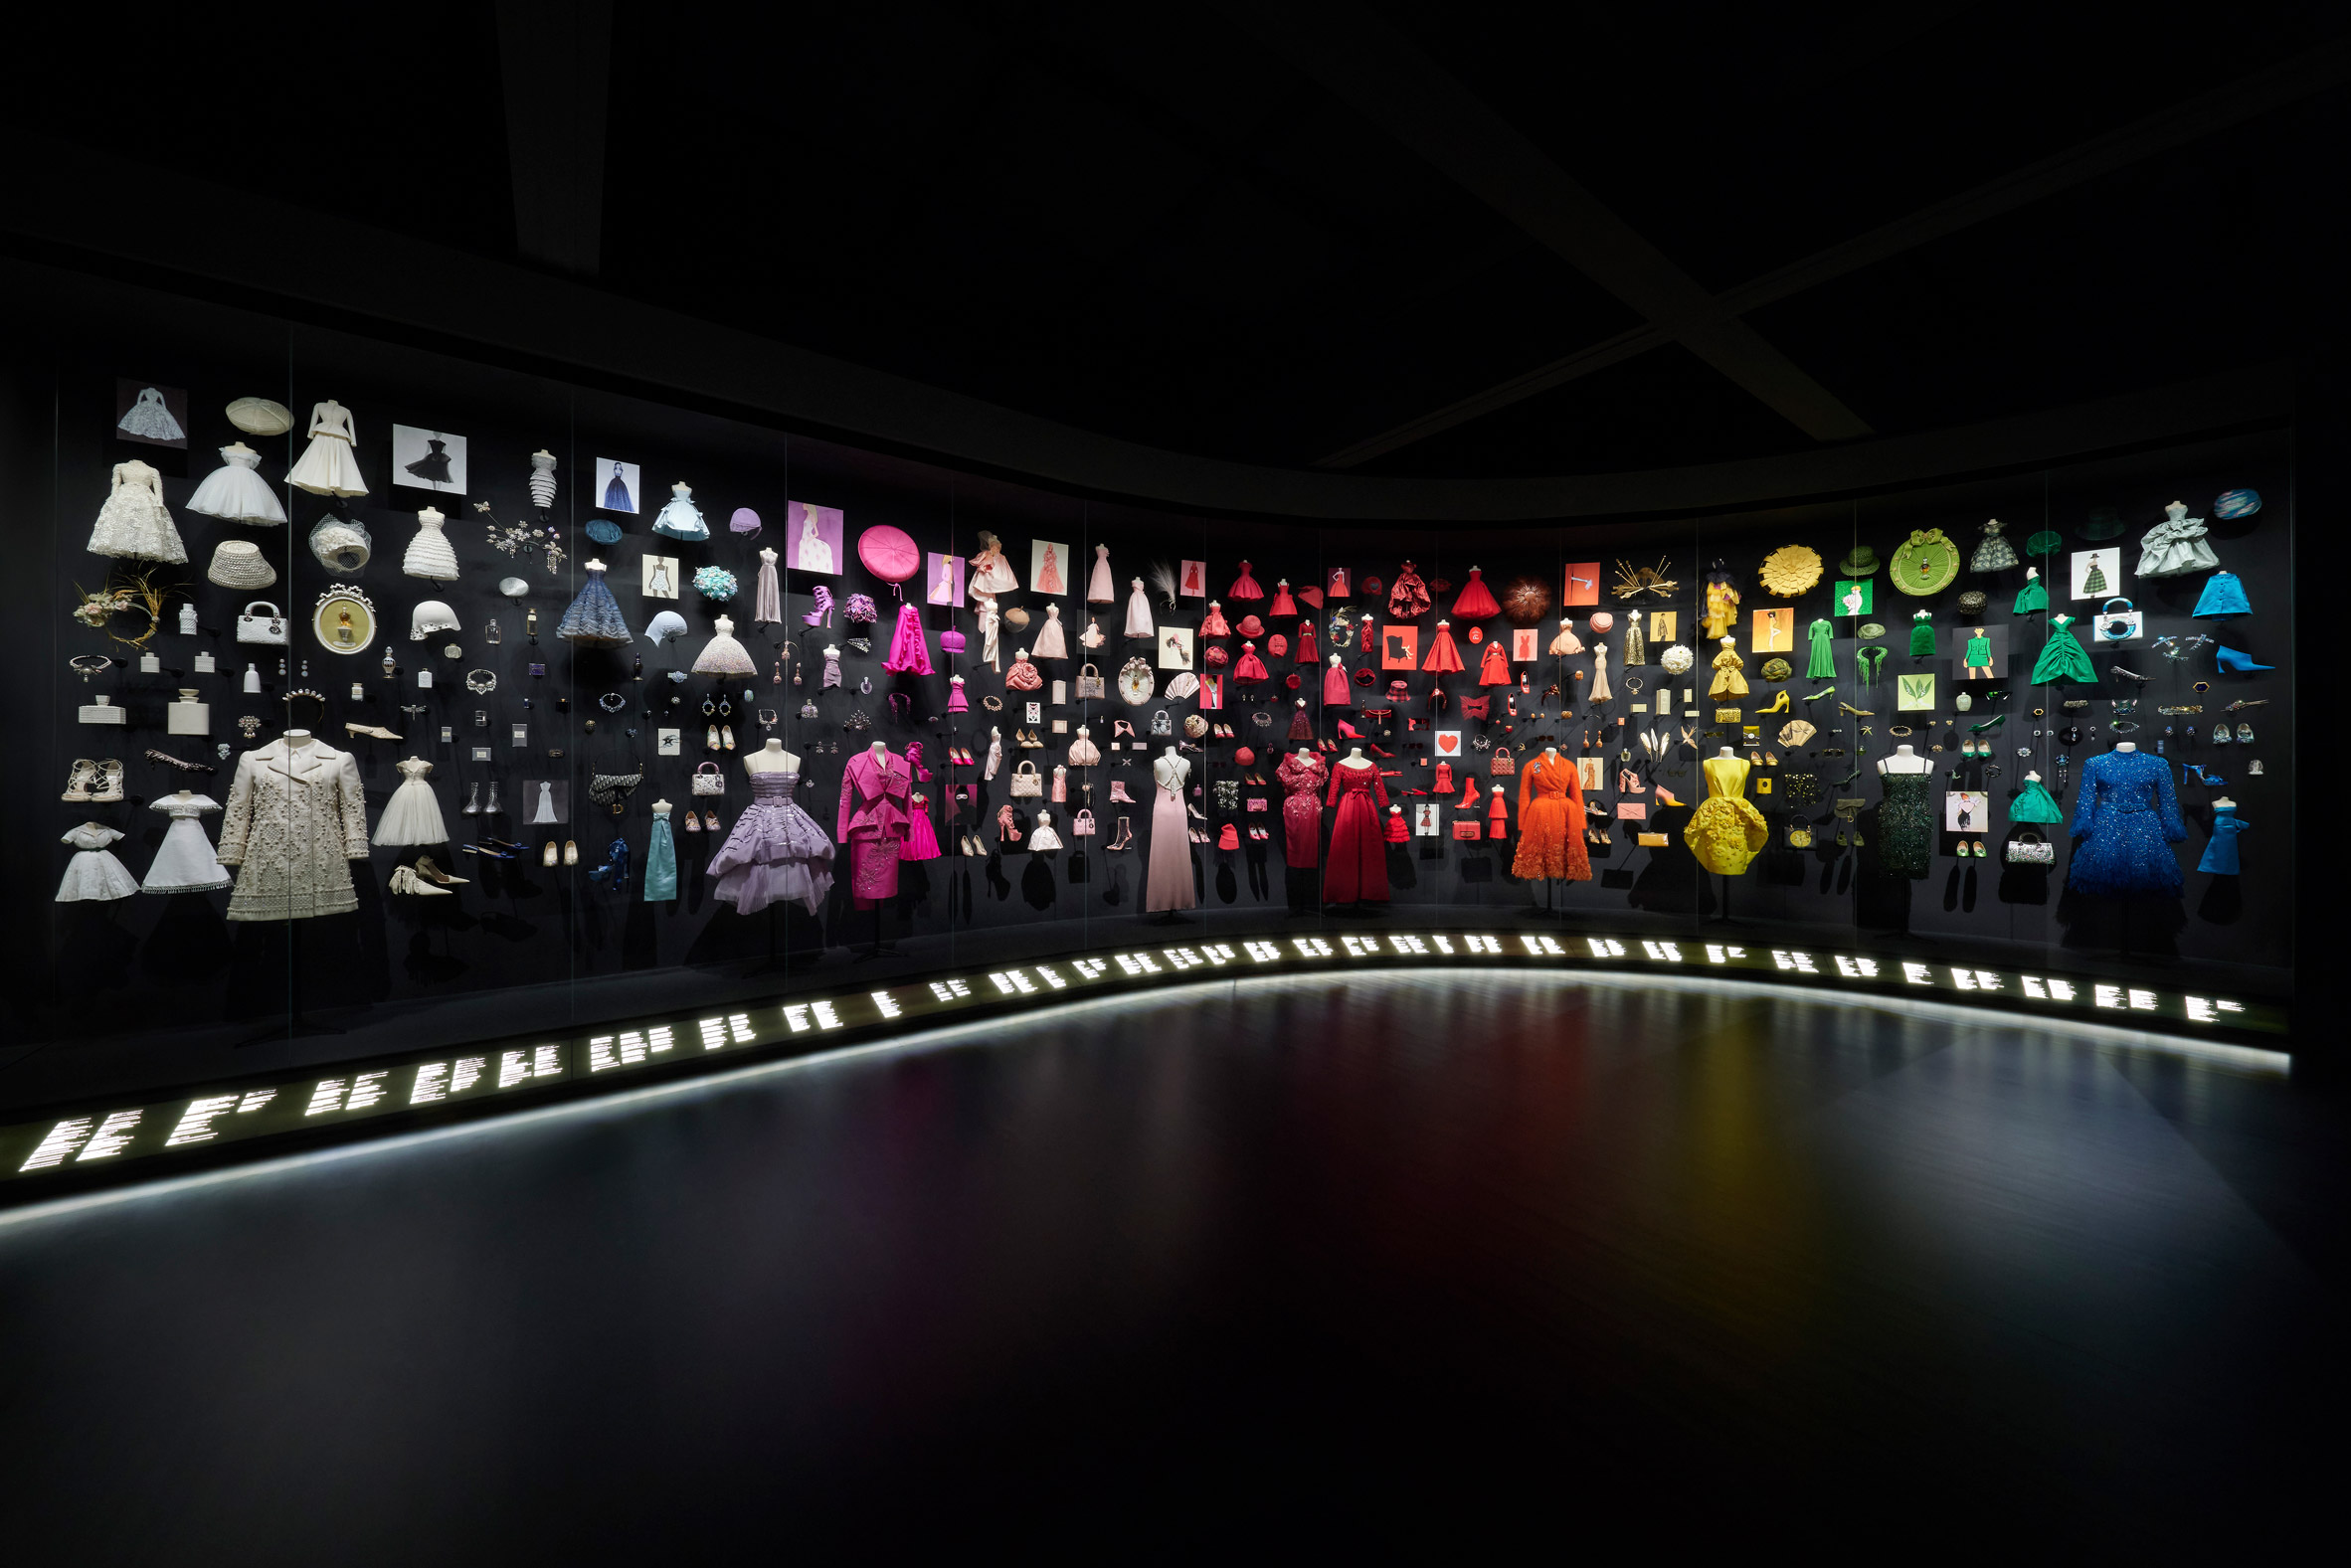 Colour-coded display of objects by Christian Dior